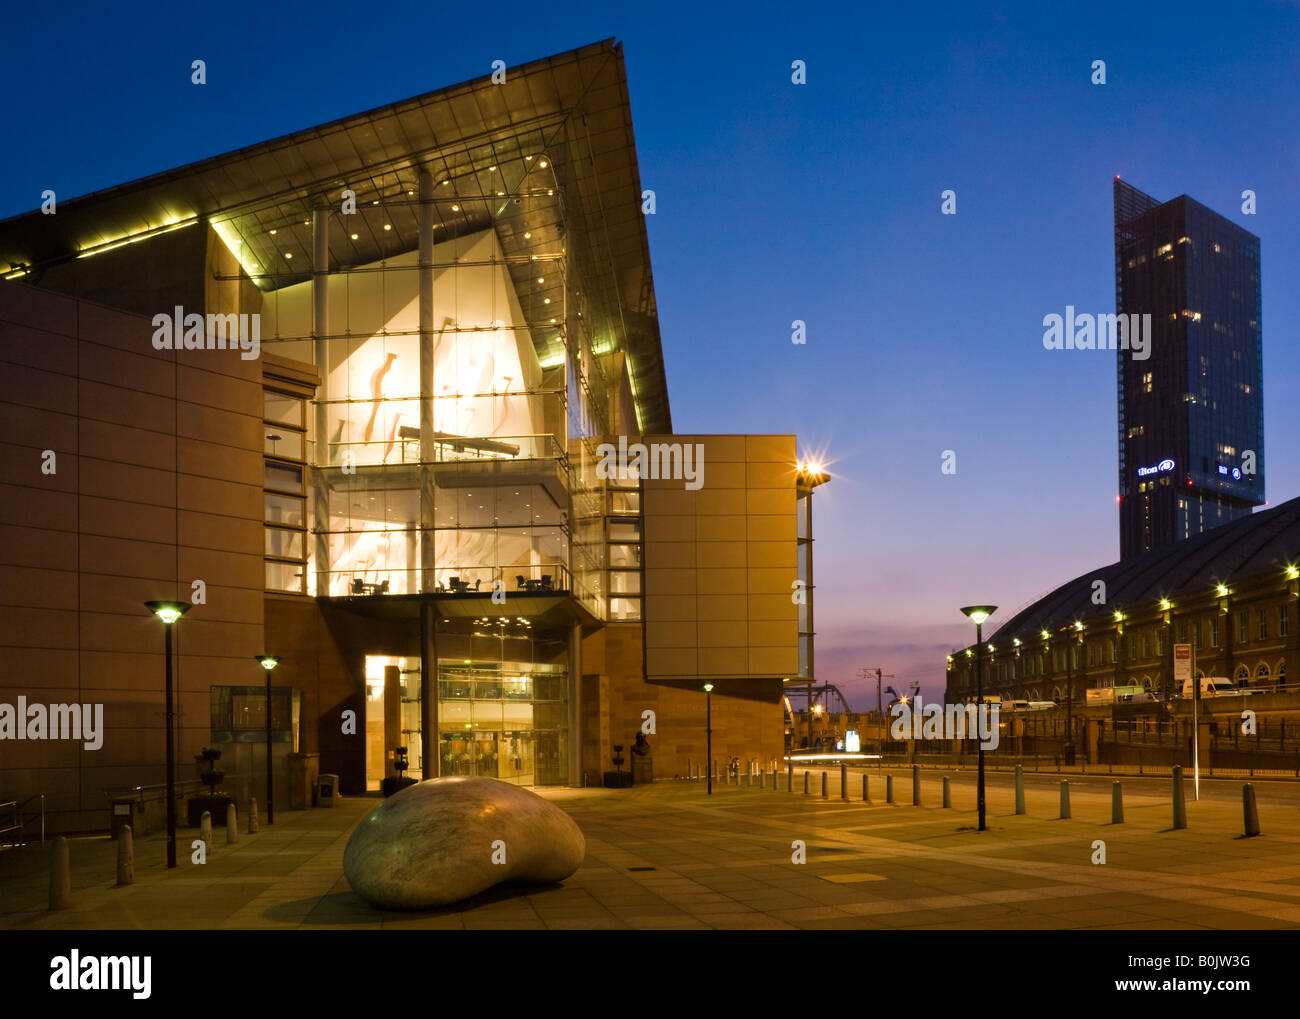 Bridgewater Hall at night. Manchester, Greater Manchester, United Kingdom. Stock Photo